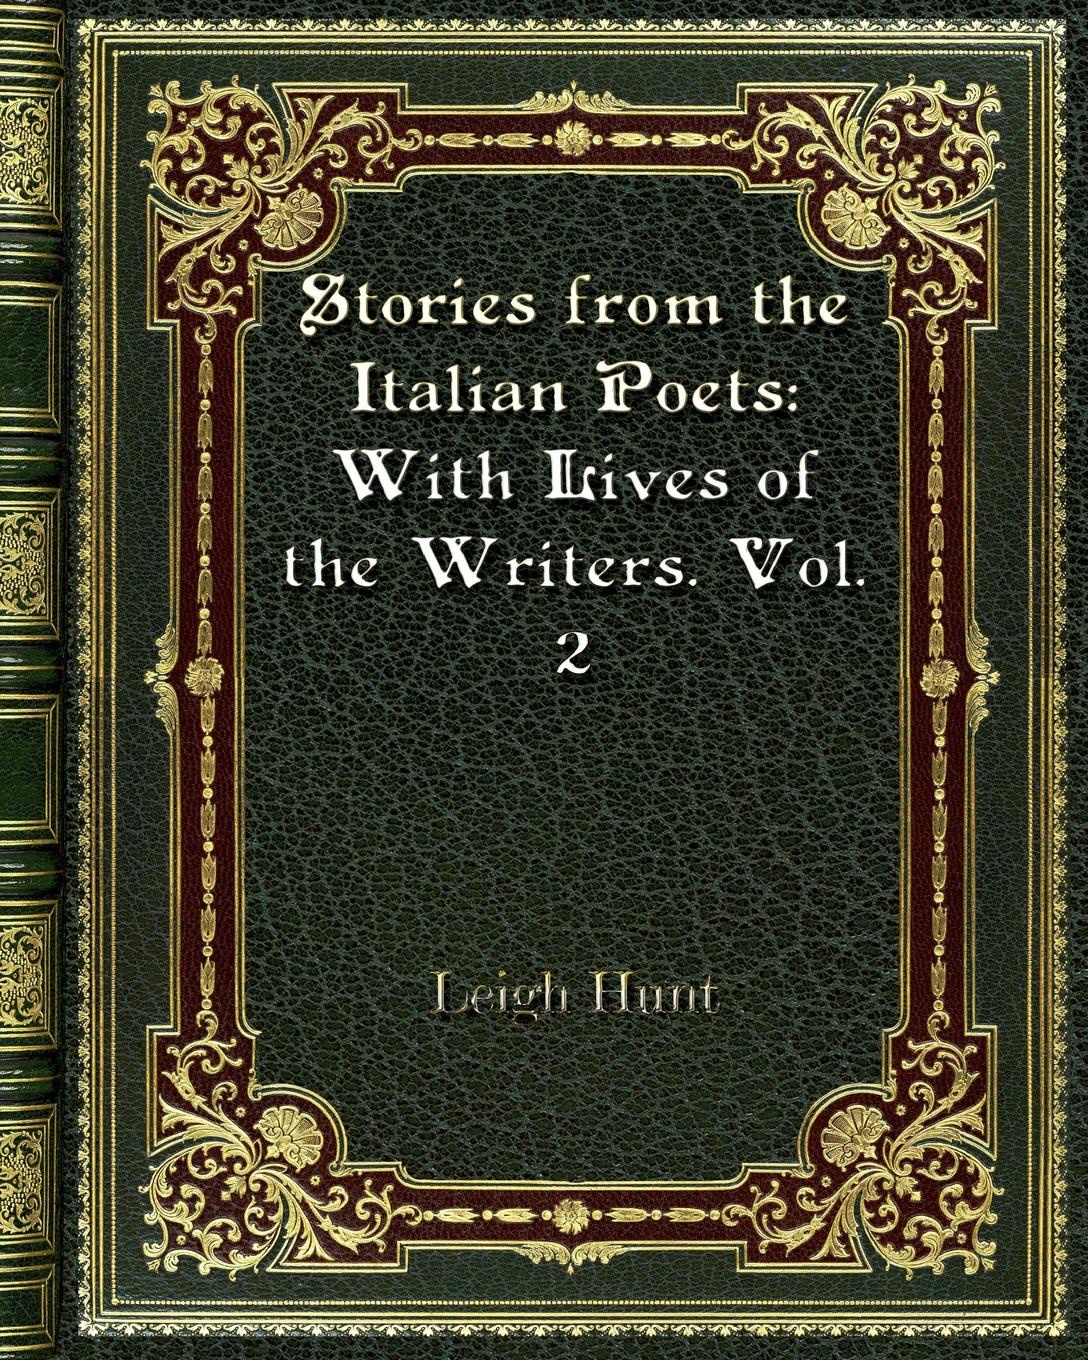 Stories from the Italian Poets. With Lives of the Writers. Vol. 2